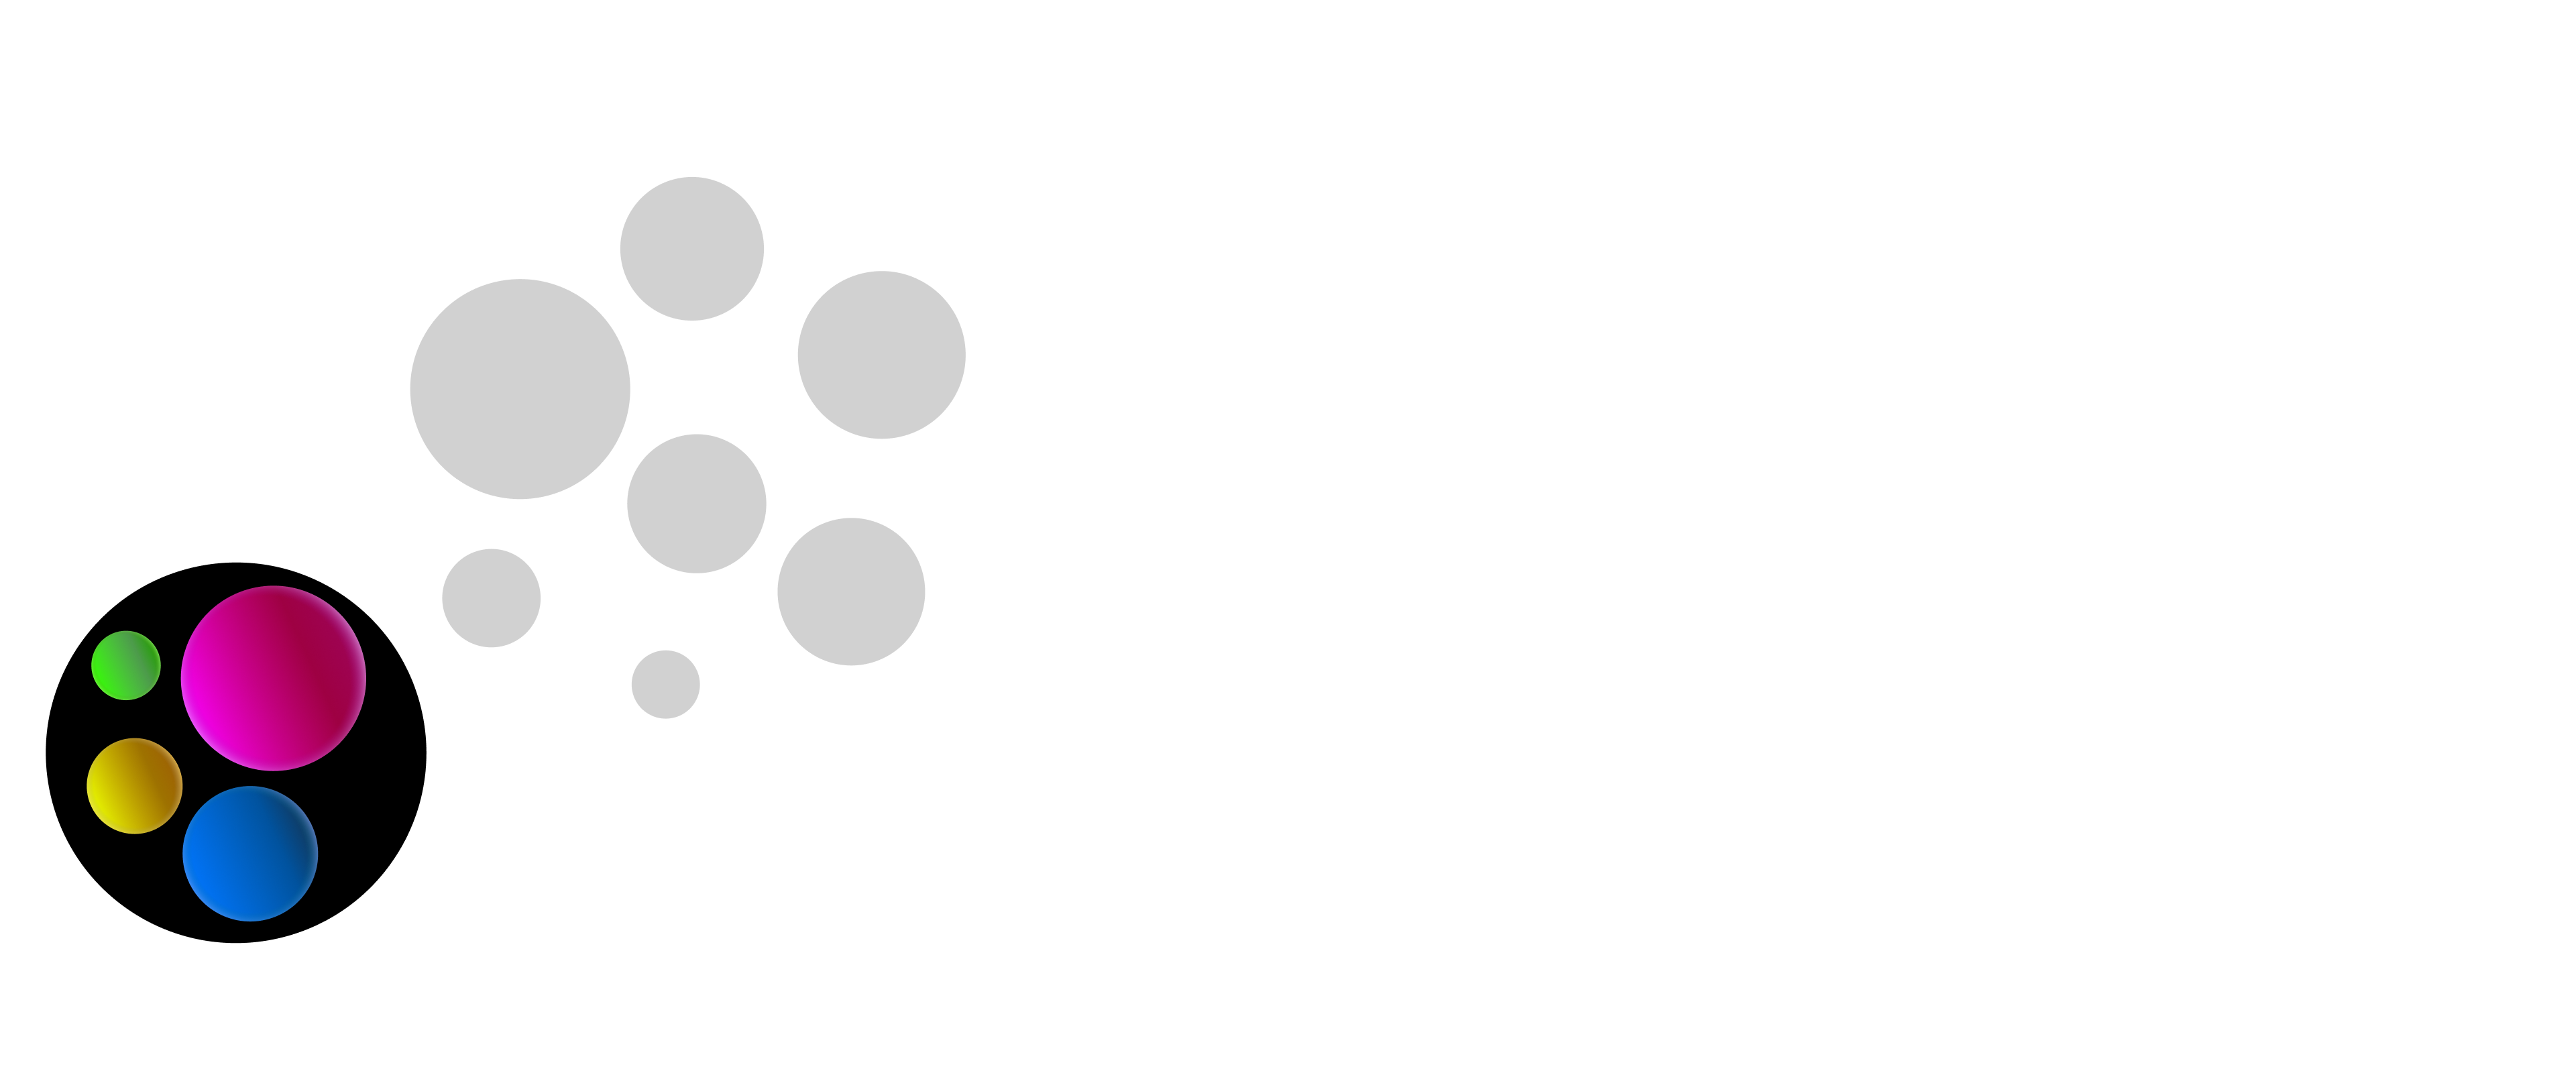 This image represents, more explicitly, separation. It shows a light grey sphere with darker spheres inside and a black sphere containing coloured spheres. This represents the two separate environments in which users find themselves when facing a specific functionality or product.